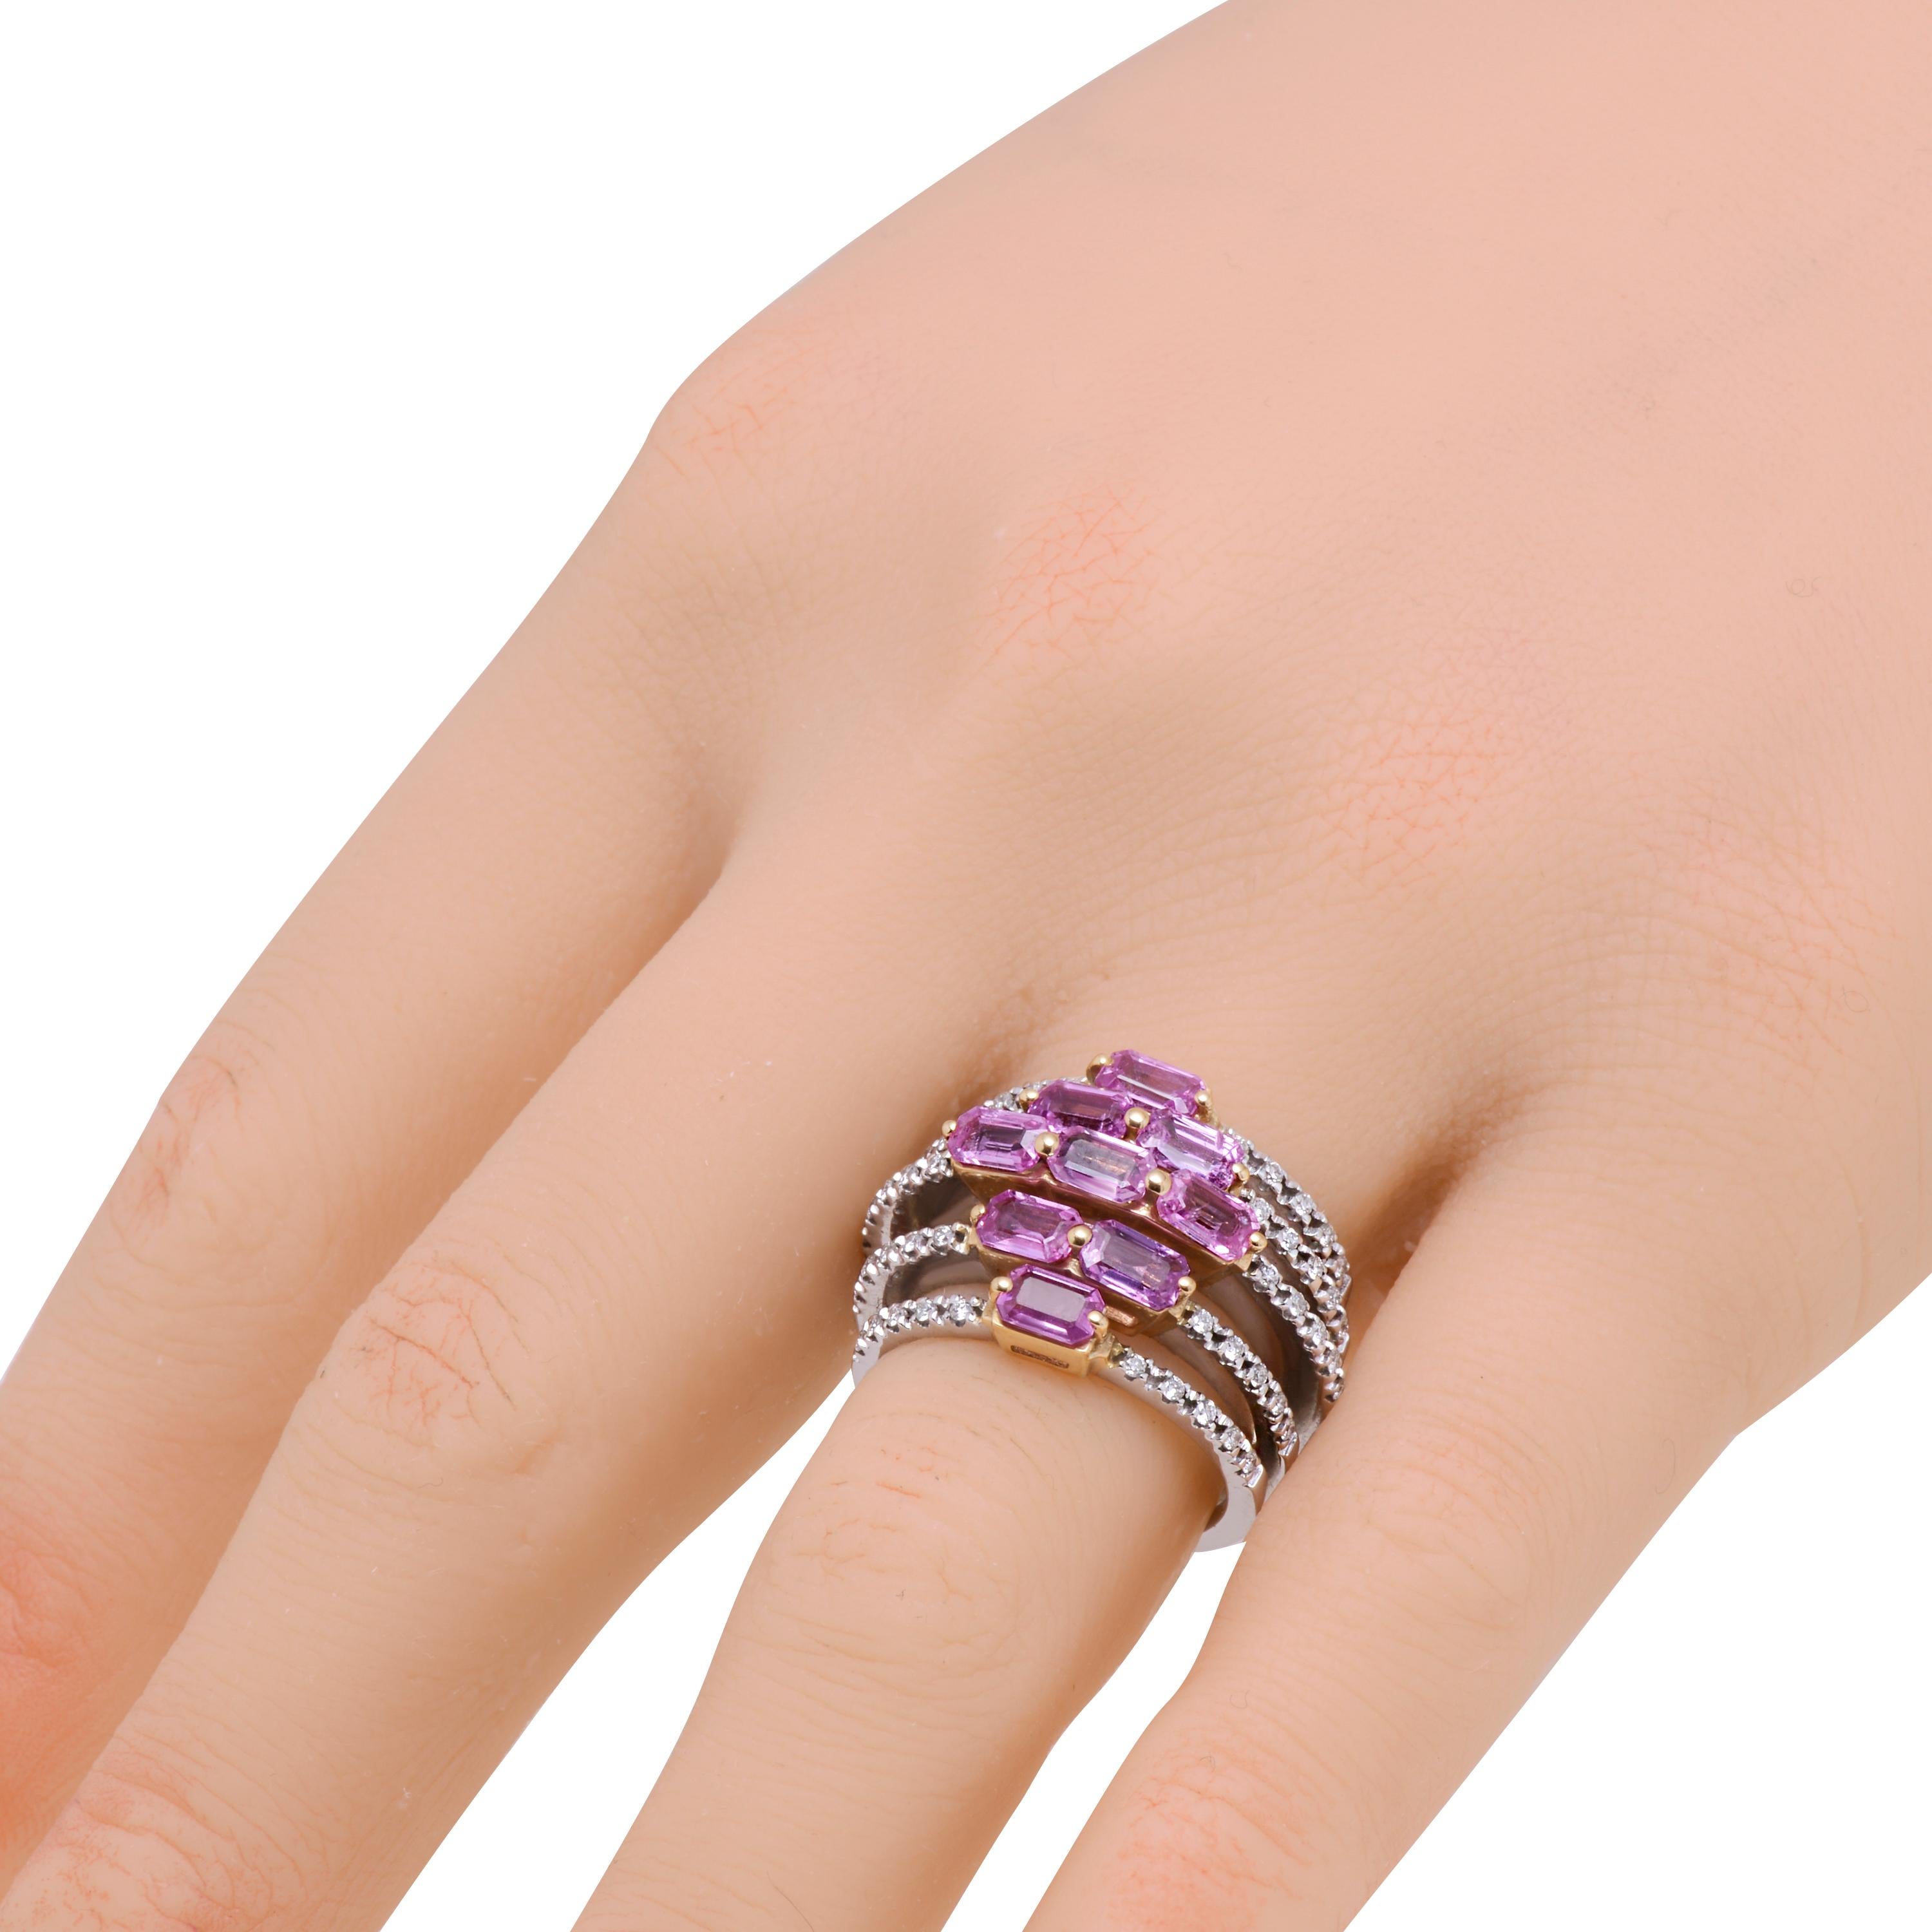 This unique Zydo 18K white gold puzzle ring features nine luxe baguette cut lavendar sapphires (2.84ct tw) placed in a diamond pattern and enhanced with multi layer diamond pave (0.34ct twd). The ring size is 7. The band width is 3/8